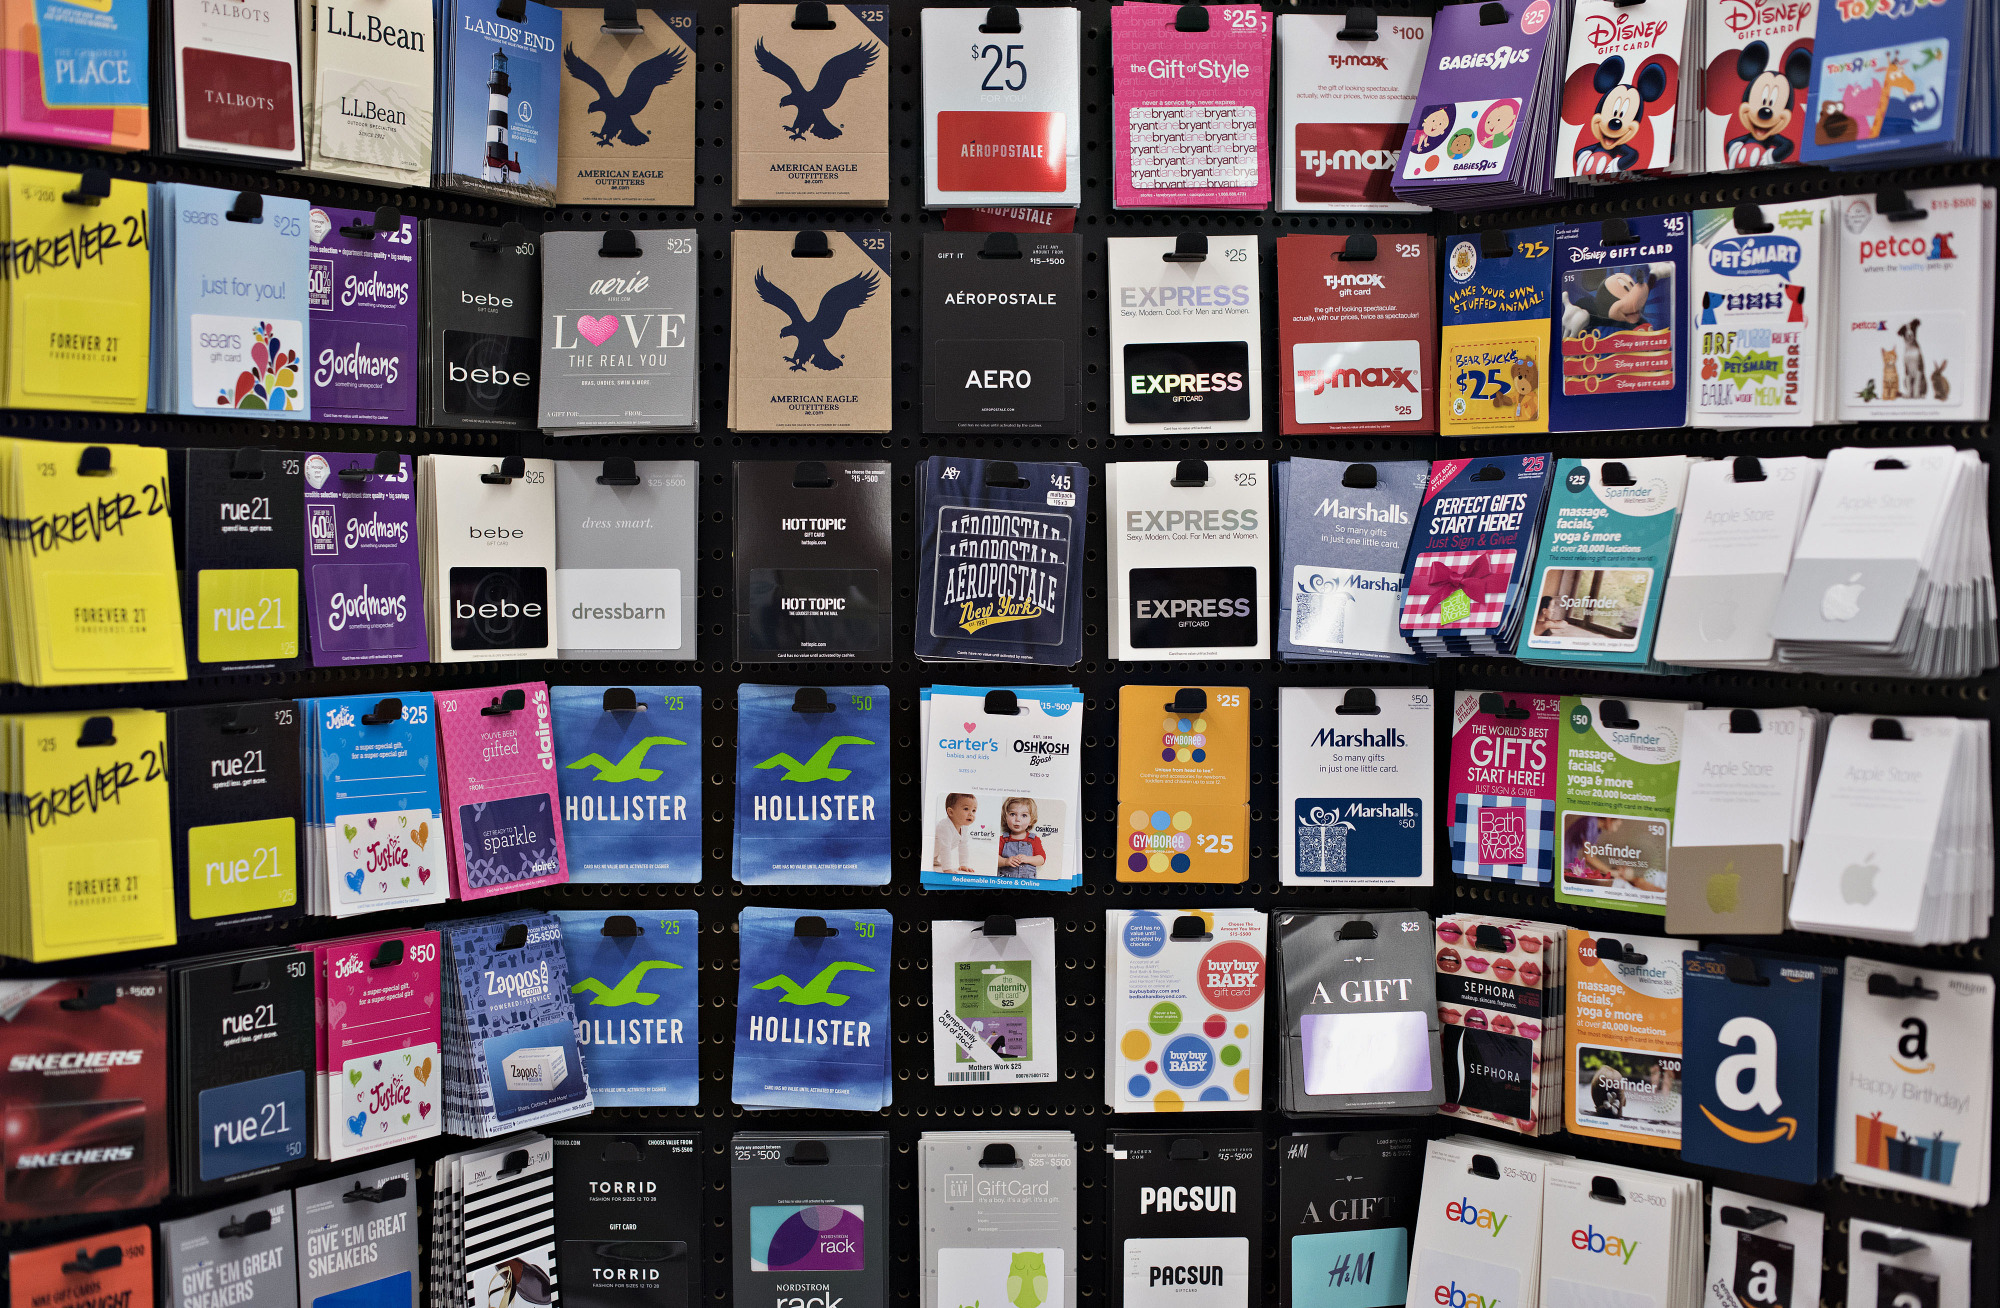 More than half of adults have unused gift cards. How to use that money